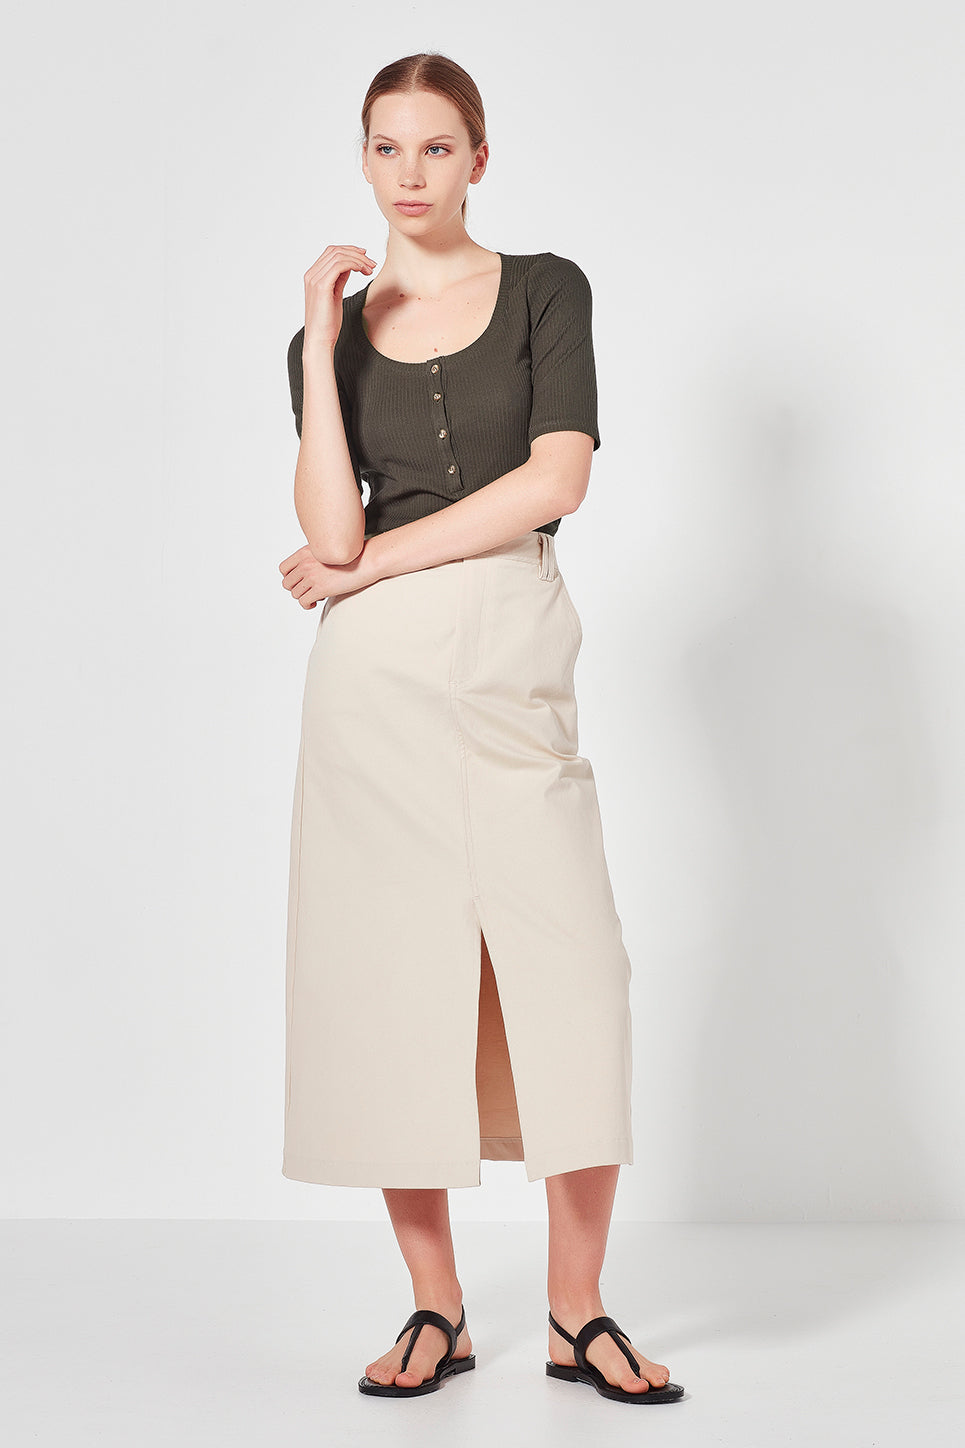 The Dryden Skirt in Natural